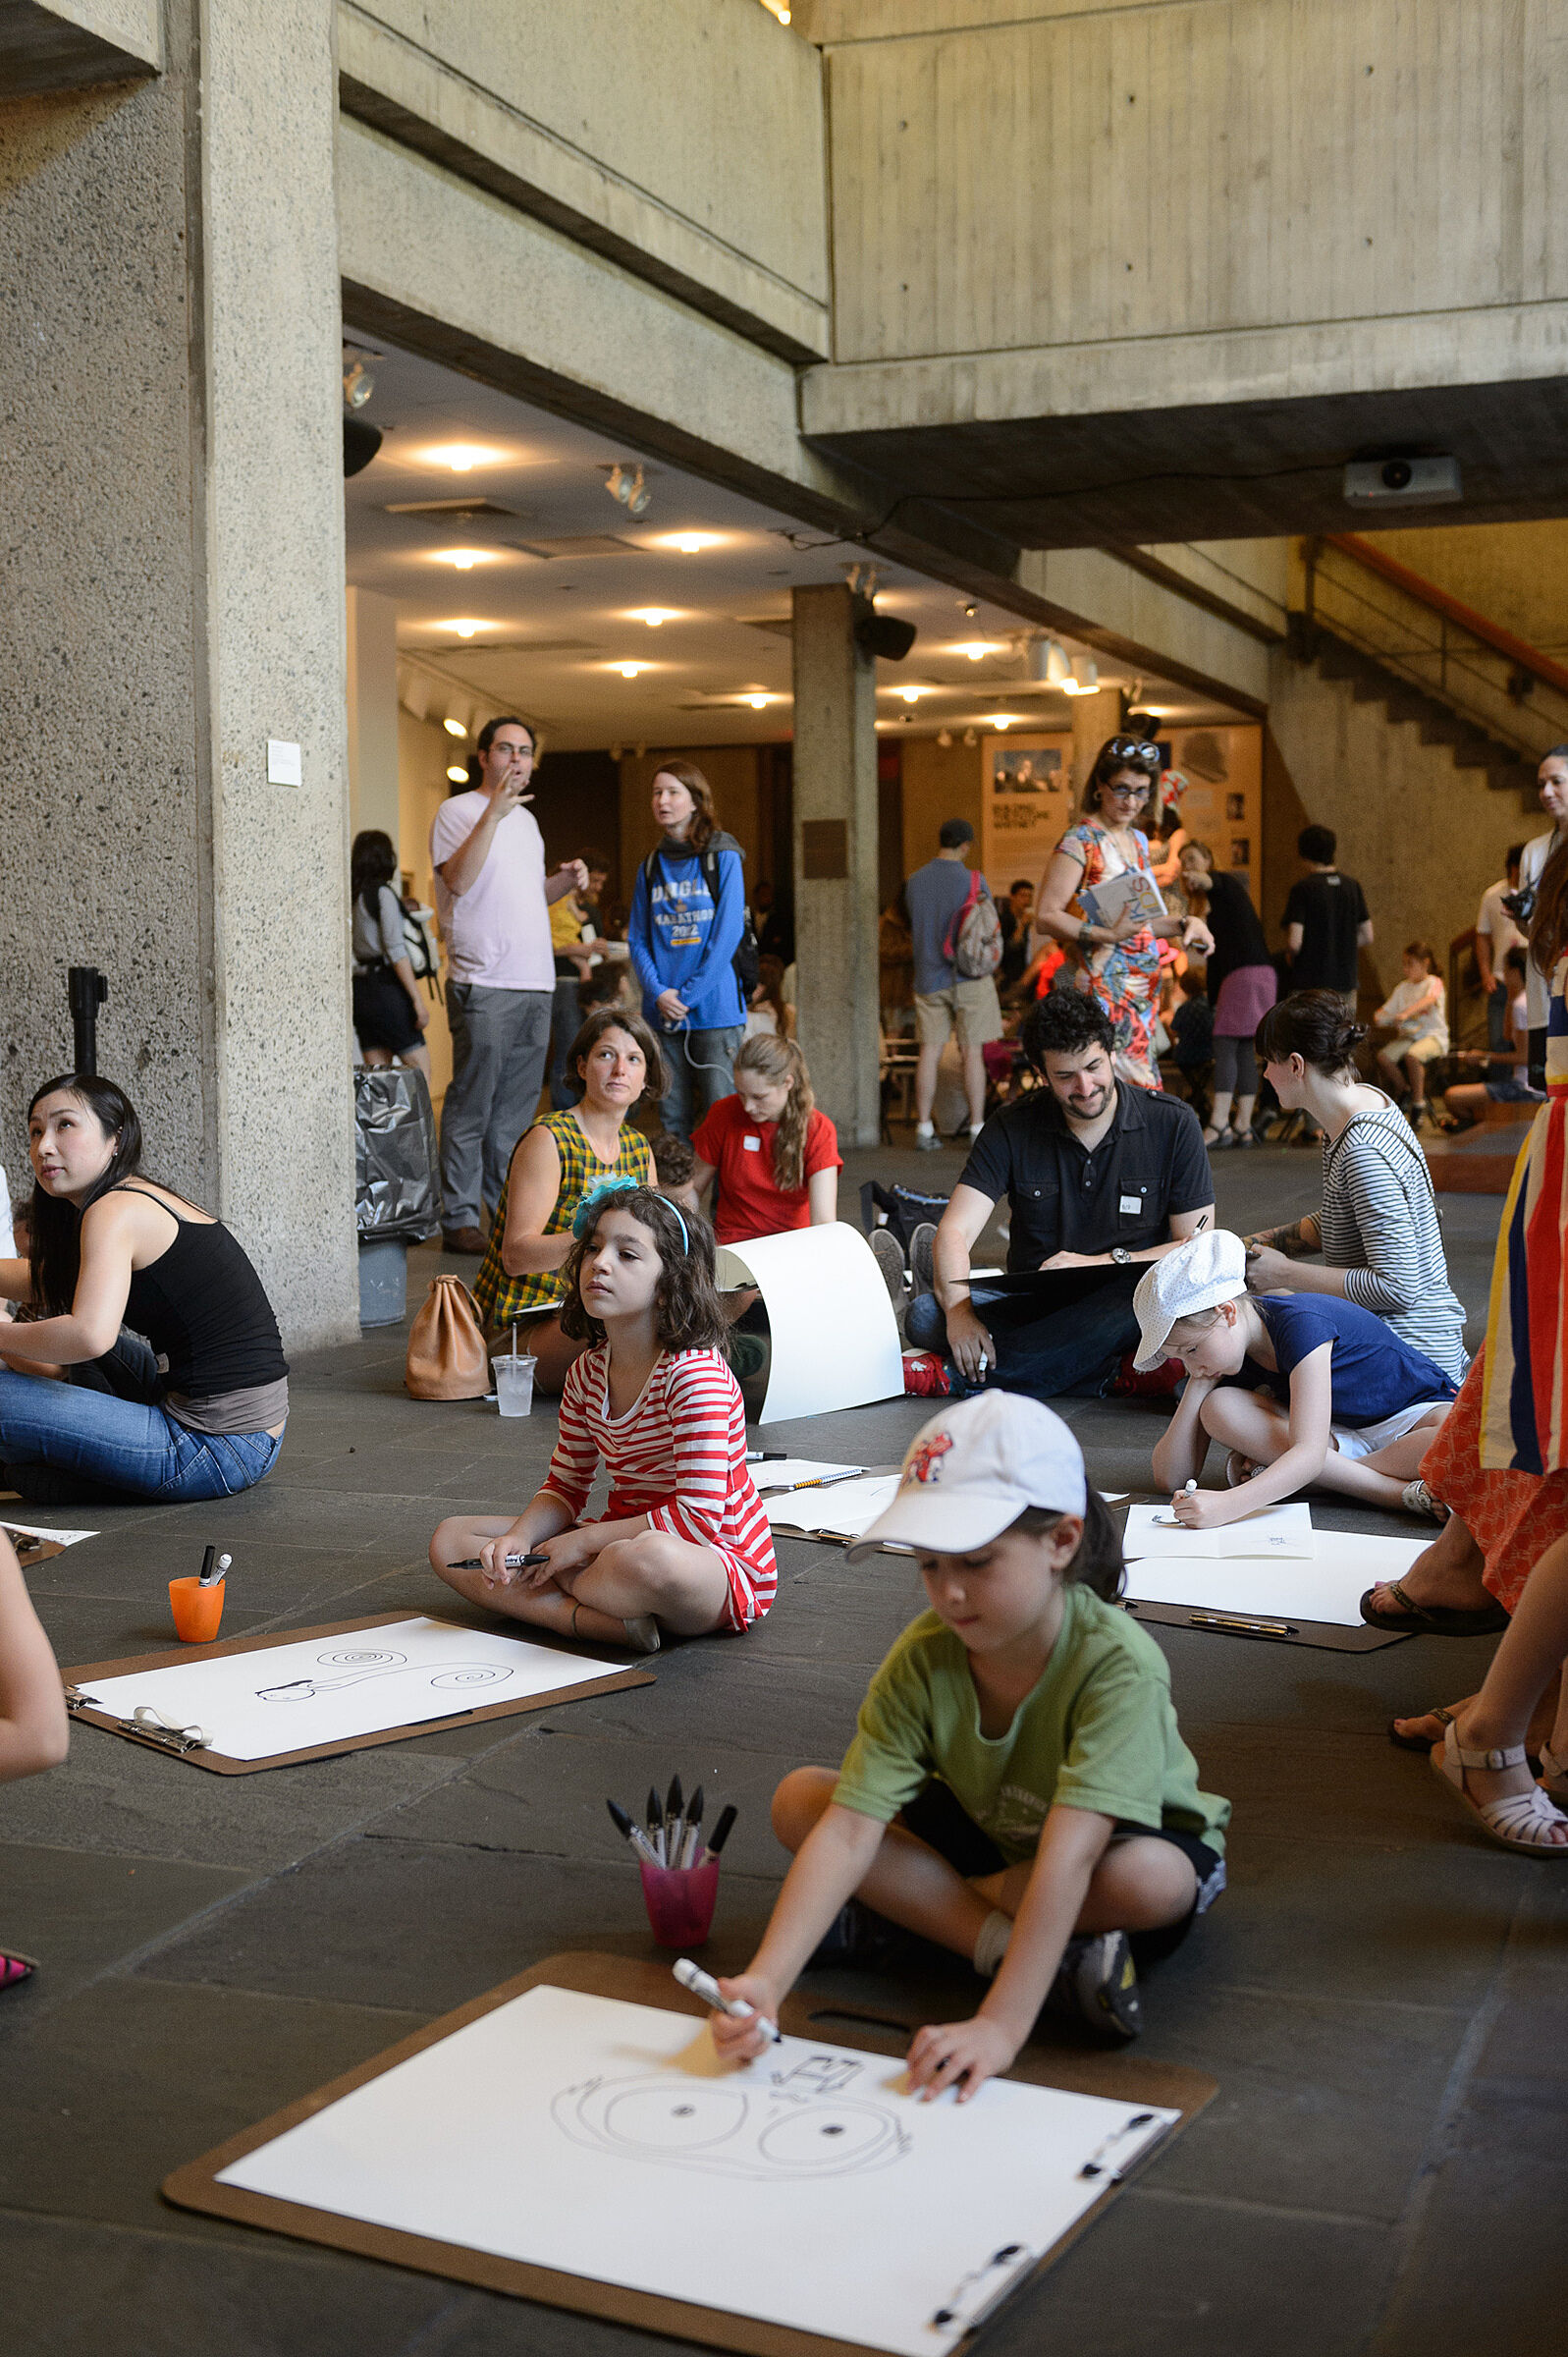 Kids sit on the ground in the museum and draw